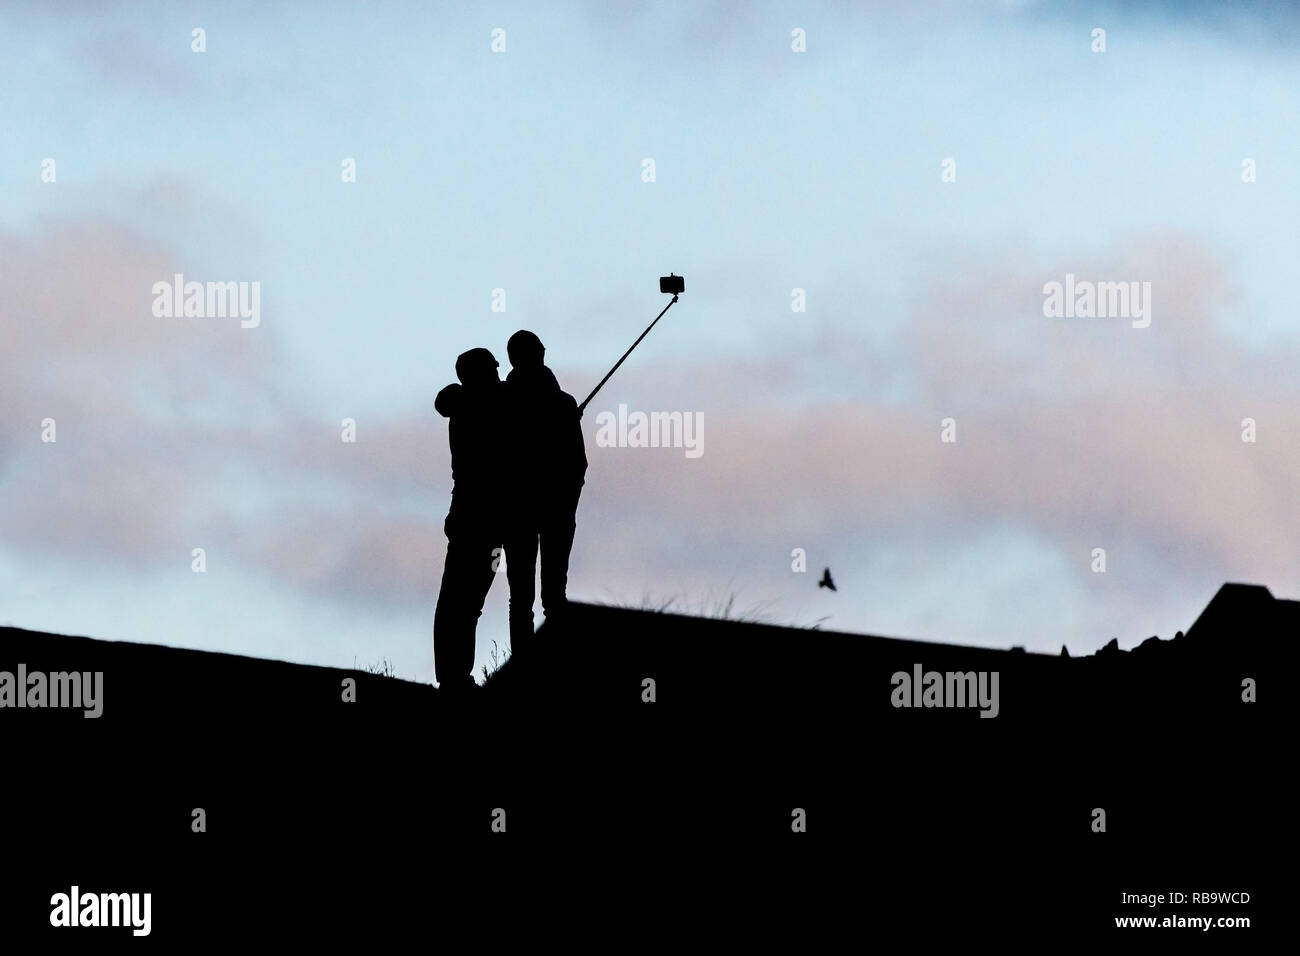 The silhouette of two people posing for a selfie photograph using a selfie stick. Stock Photo